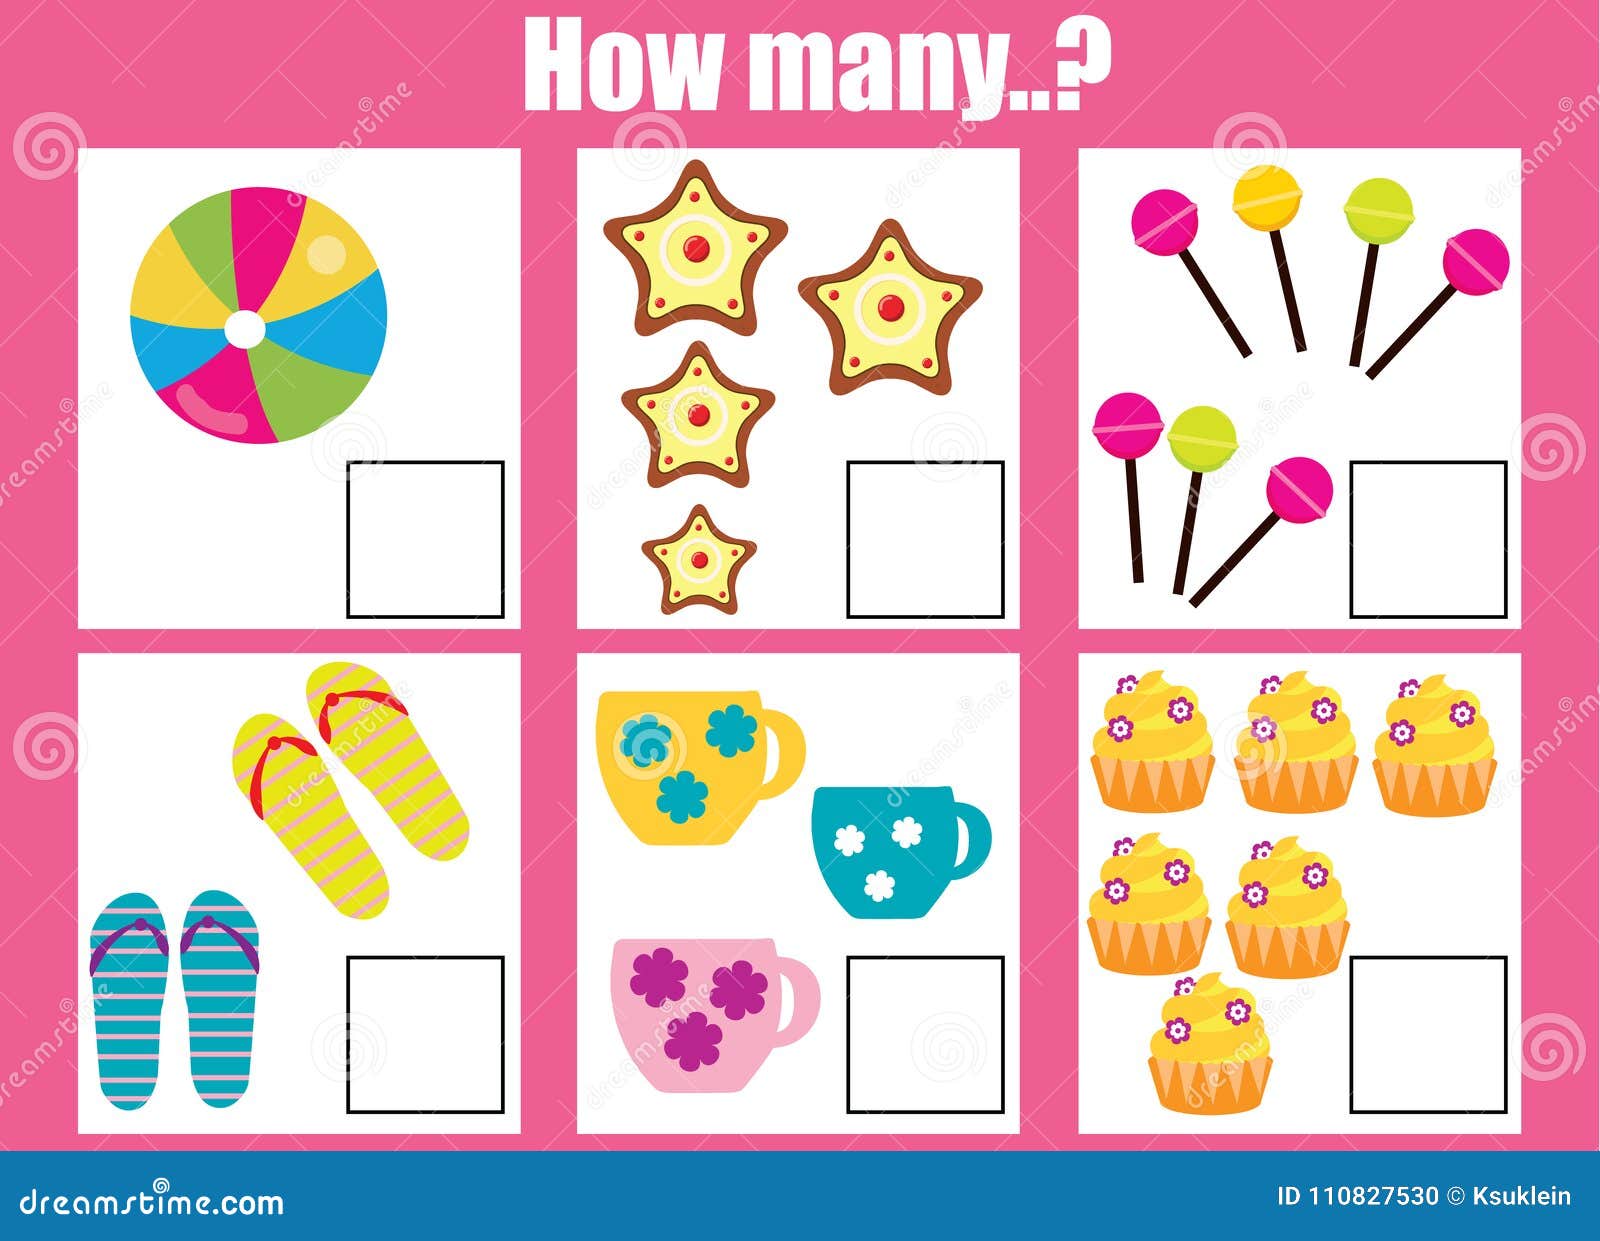 counting educational children game, math kids activity. how many objects task